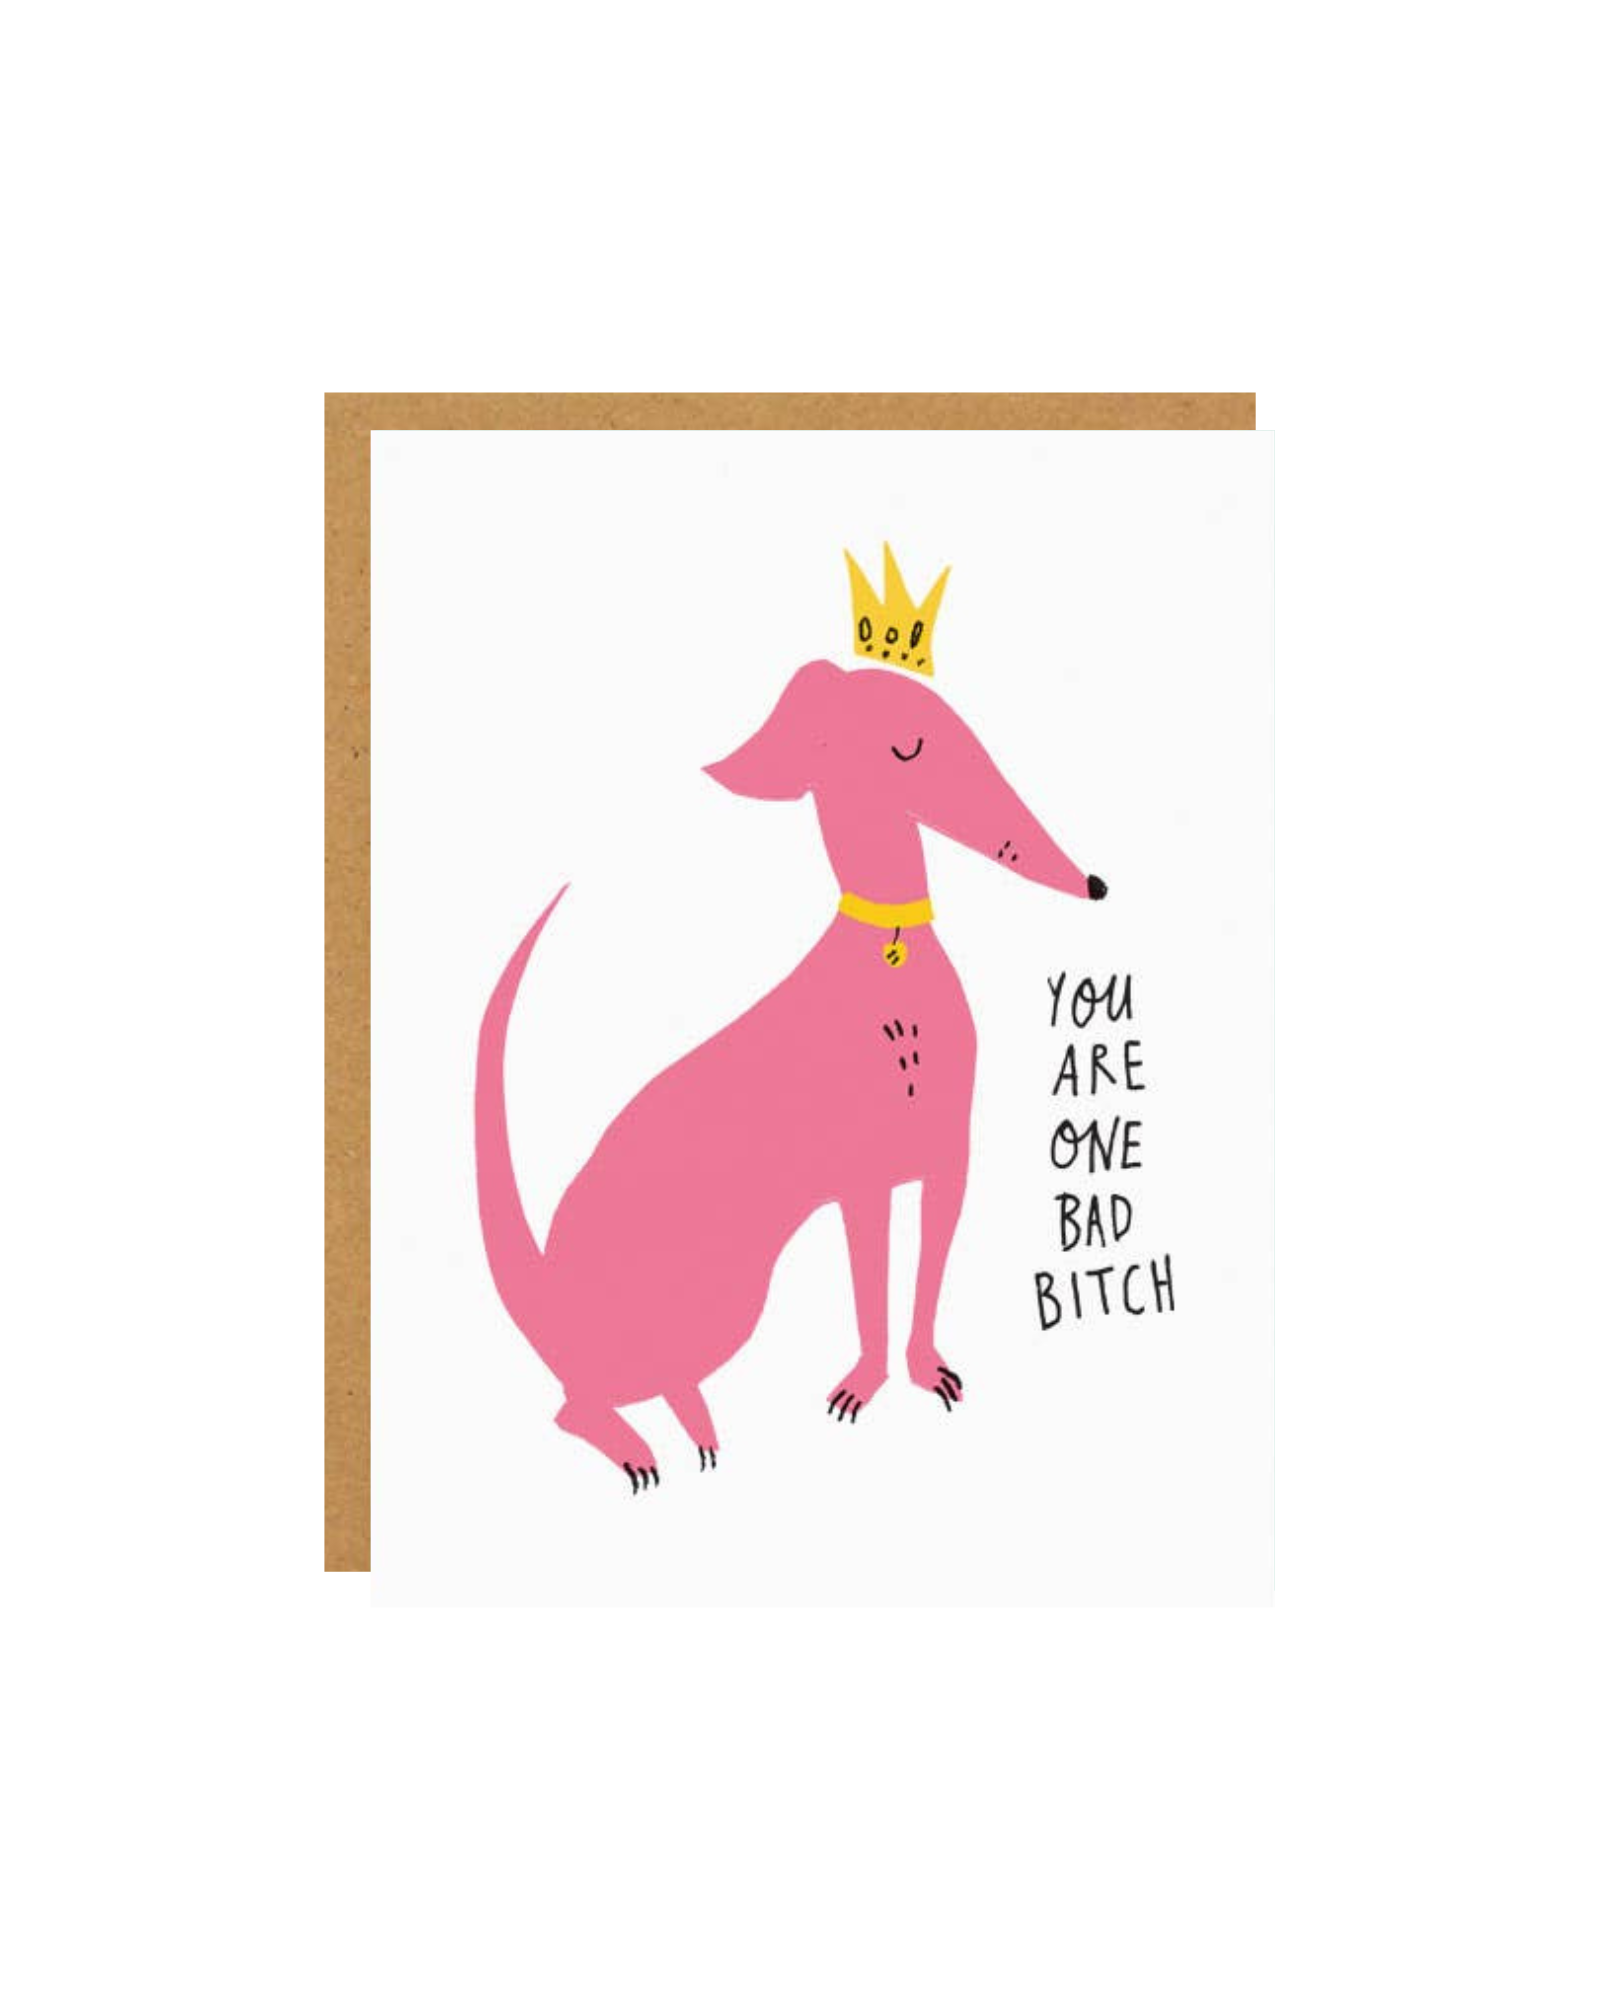 White card with a pink dog wearing a gold crown next to the words "you are one bad bitch" in handwritten text